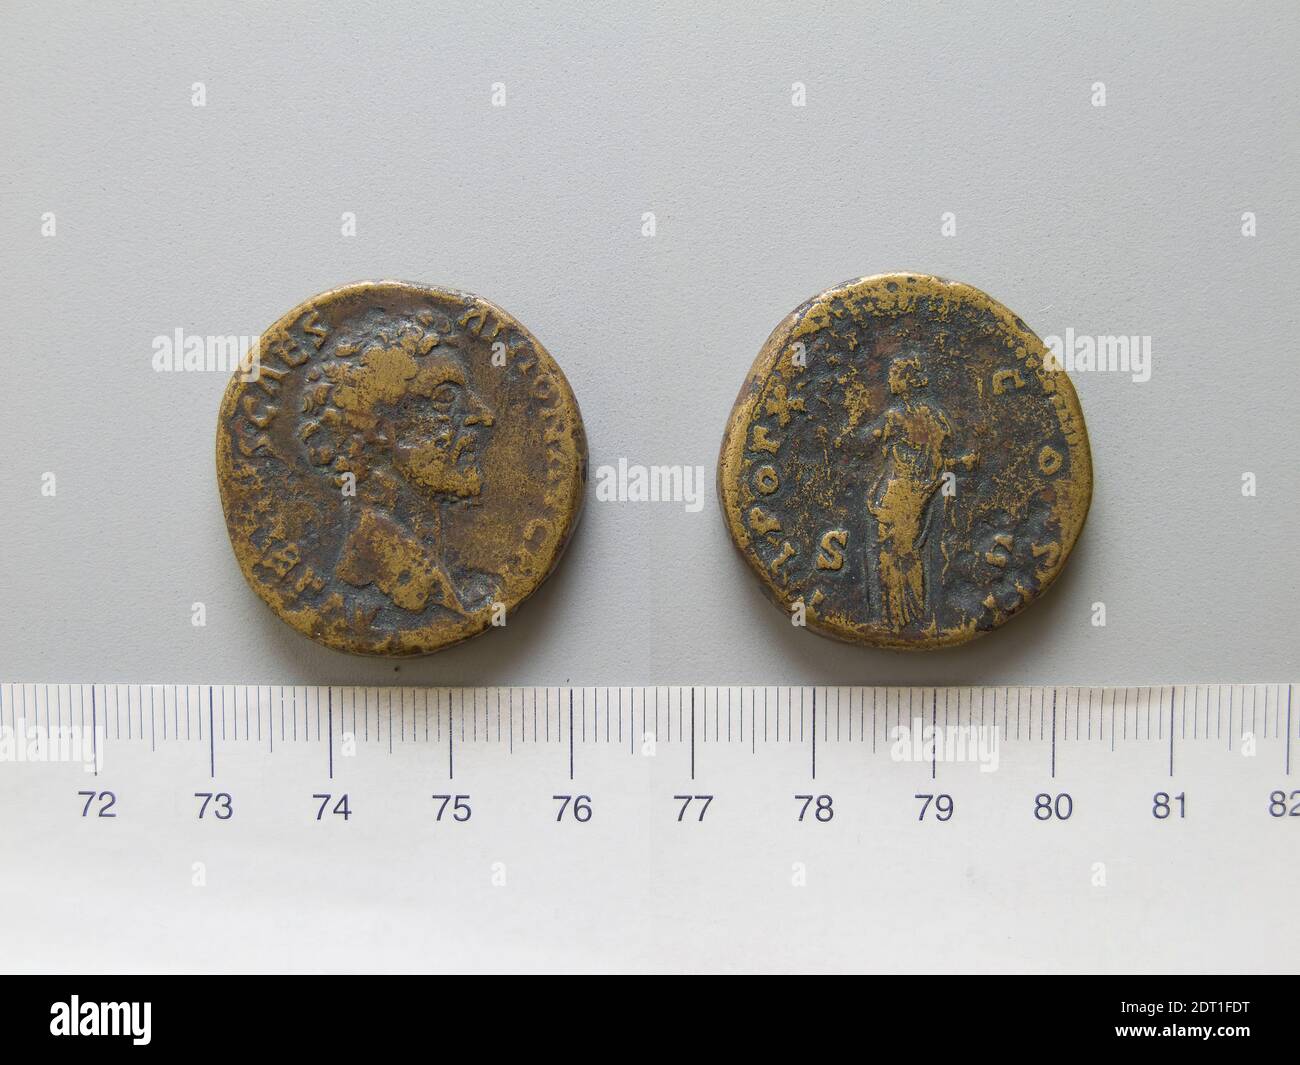 Ruler: Marcus Aurelius, Emperor of Rome, A.D. 121–180, ruled  A.D. 161–80, Mint: Rome, Sestertius of Marcus Aurelius, Emperor of Rome from Rome, A.D. 156–57, Orichalcum, 26.56 g, 5:00, 31.2 mm, Made in Rome, Italy, Roman, 2nd century A.D., Numismatics Stock Photo